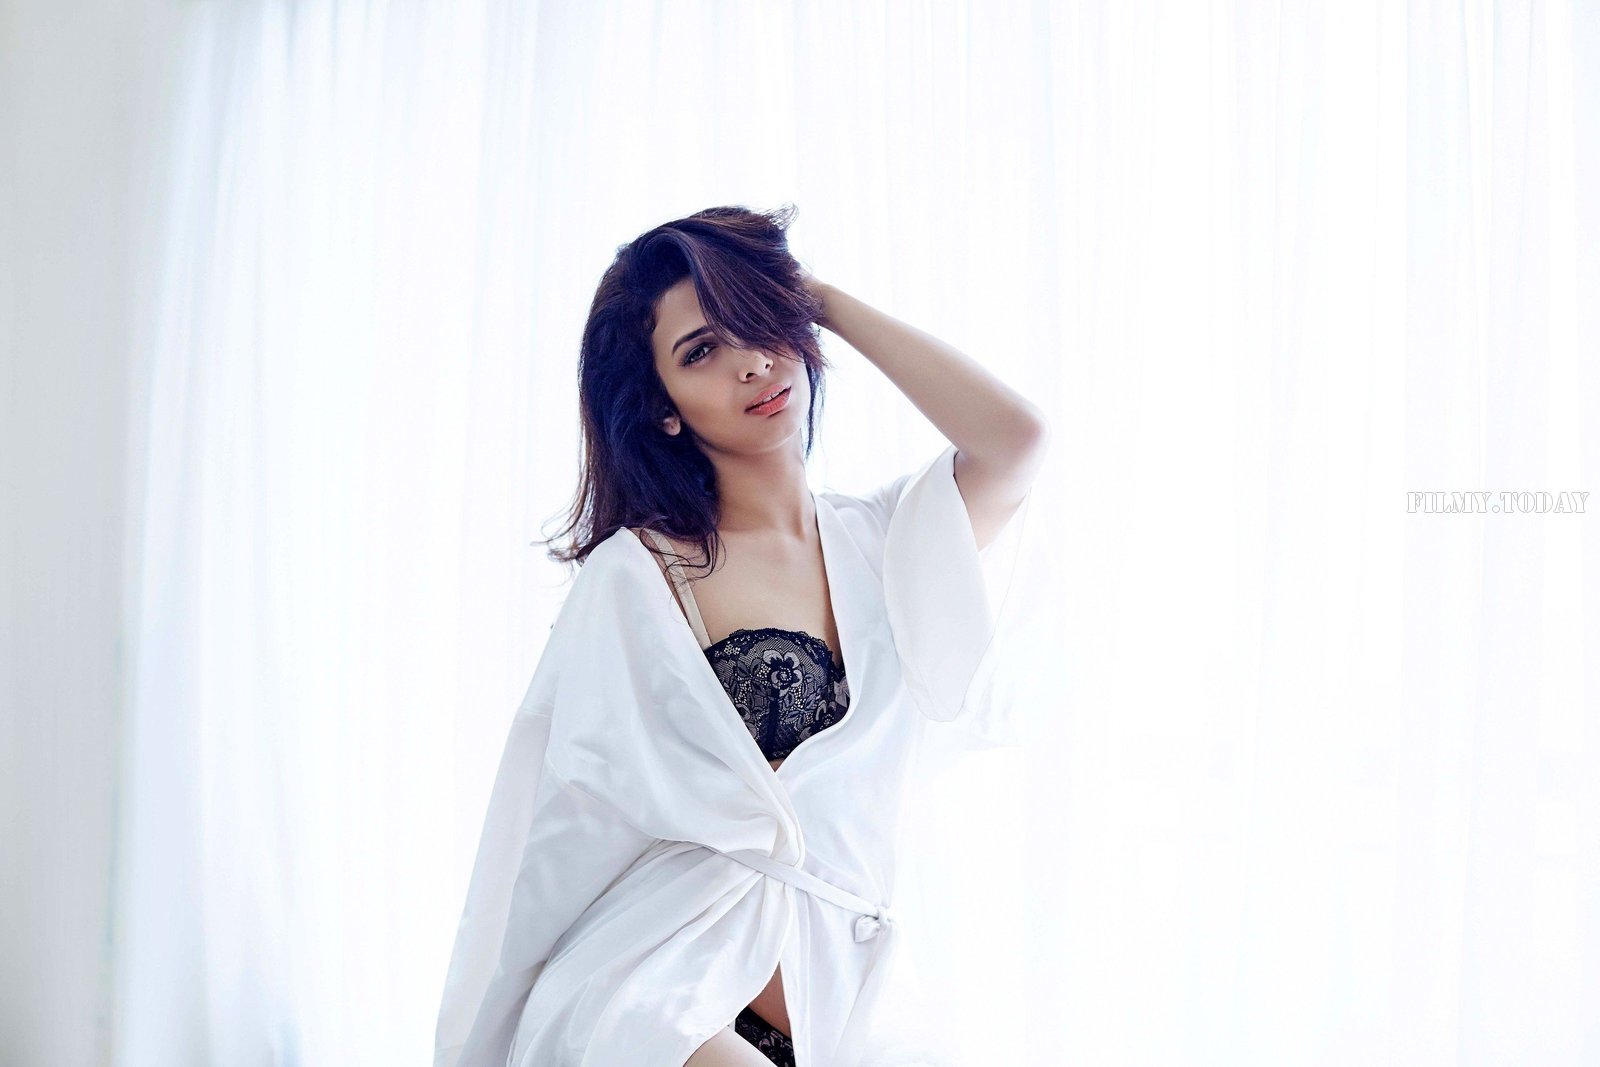 Photos: Heena Panchal goes Topless in her recent Photoshoot | Picture 1551938